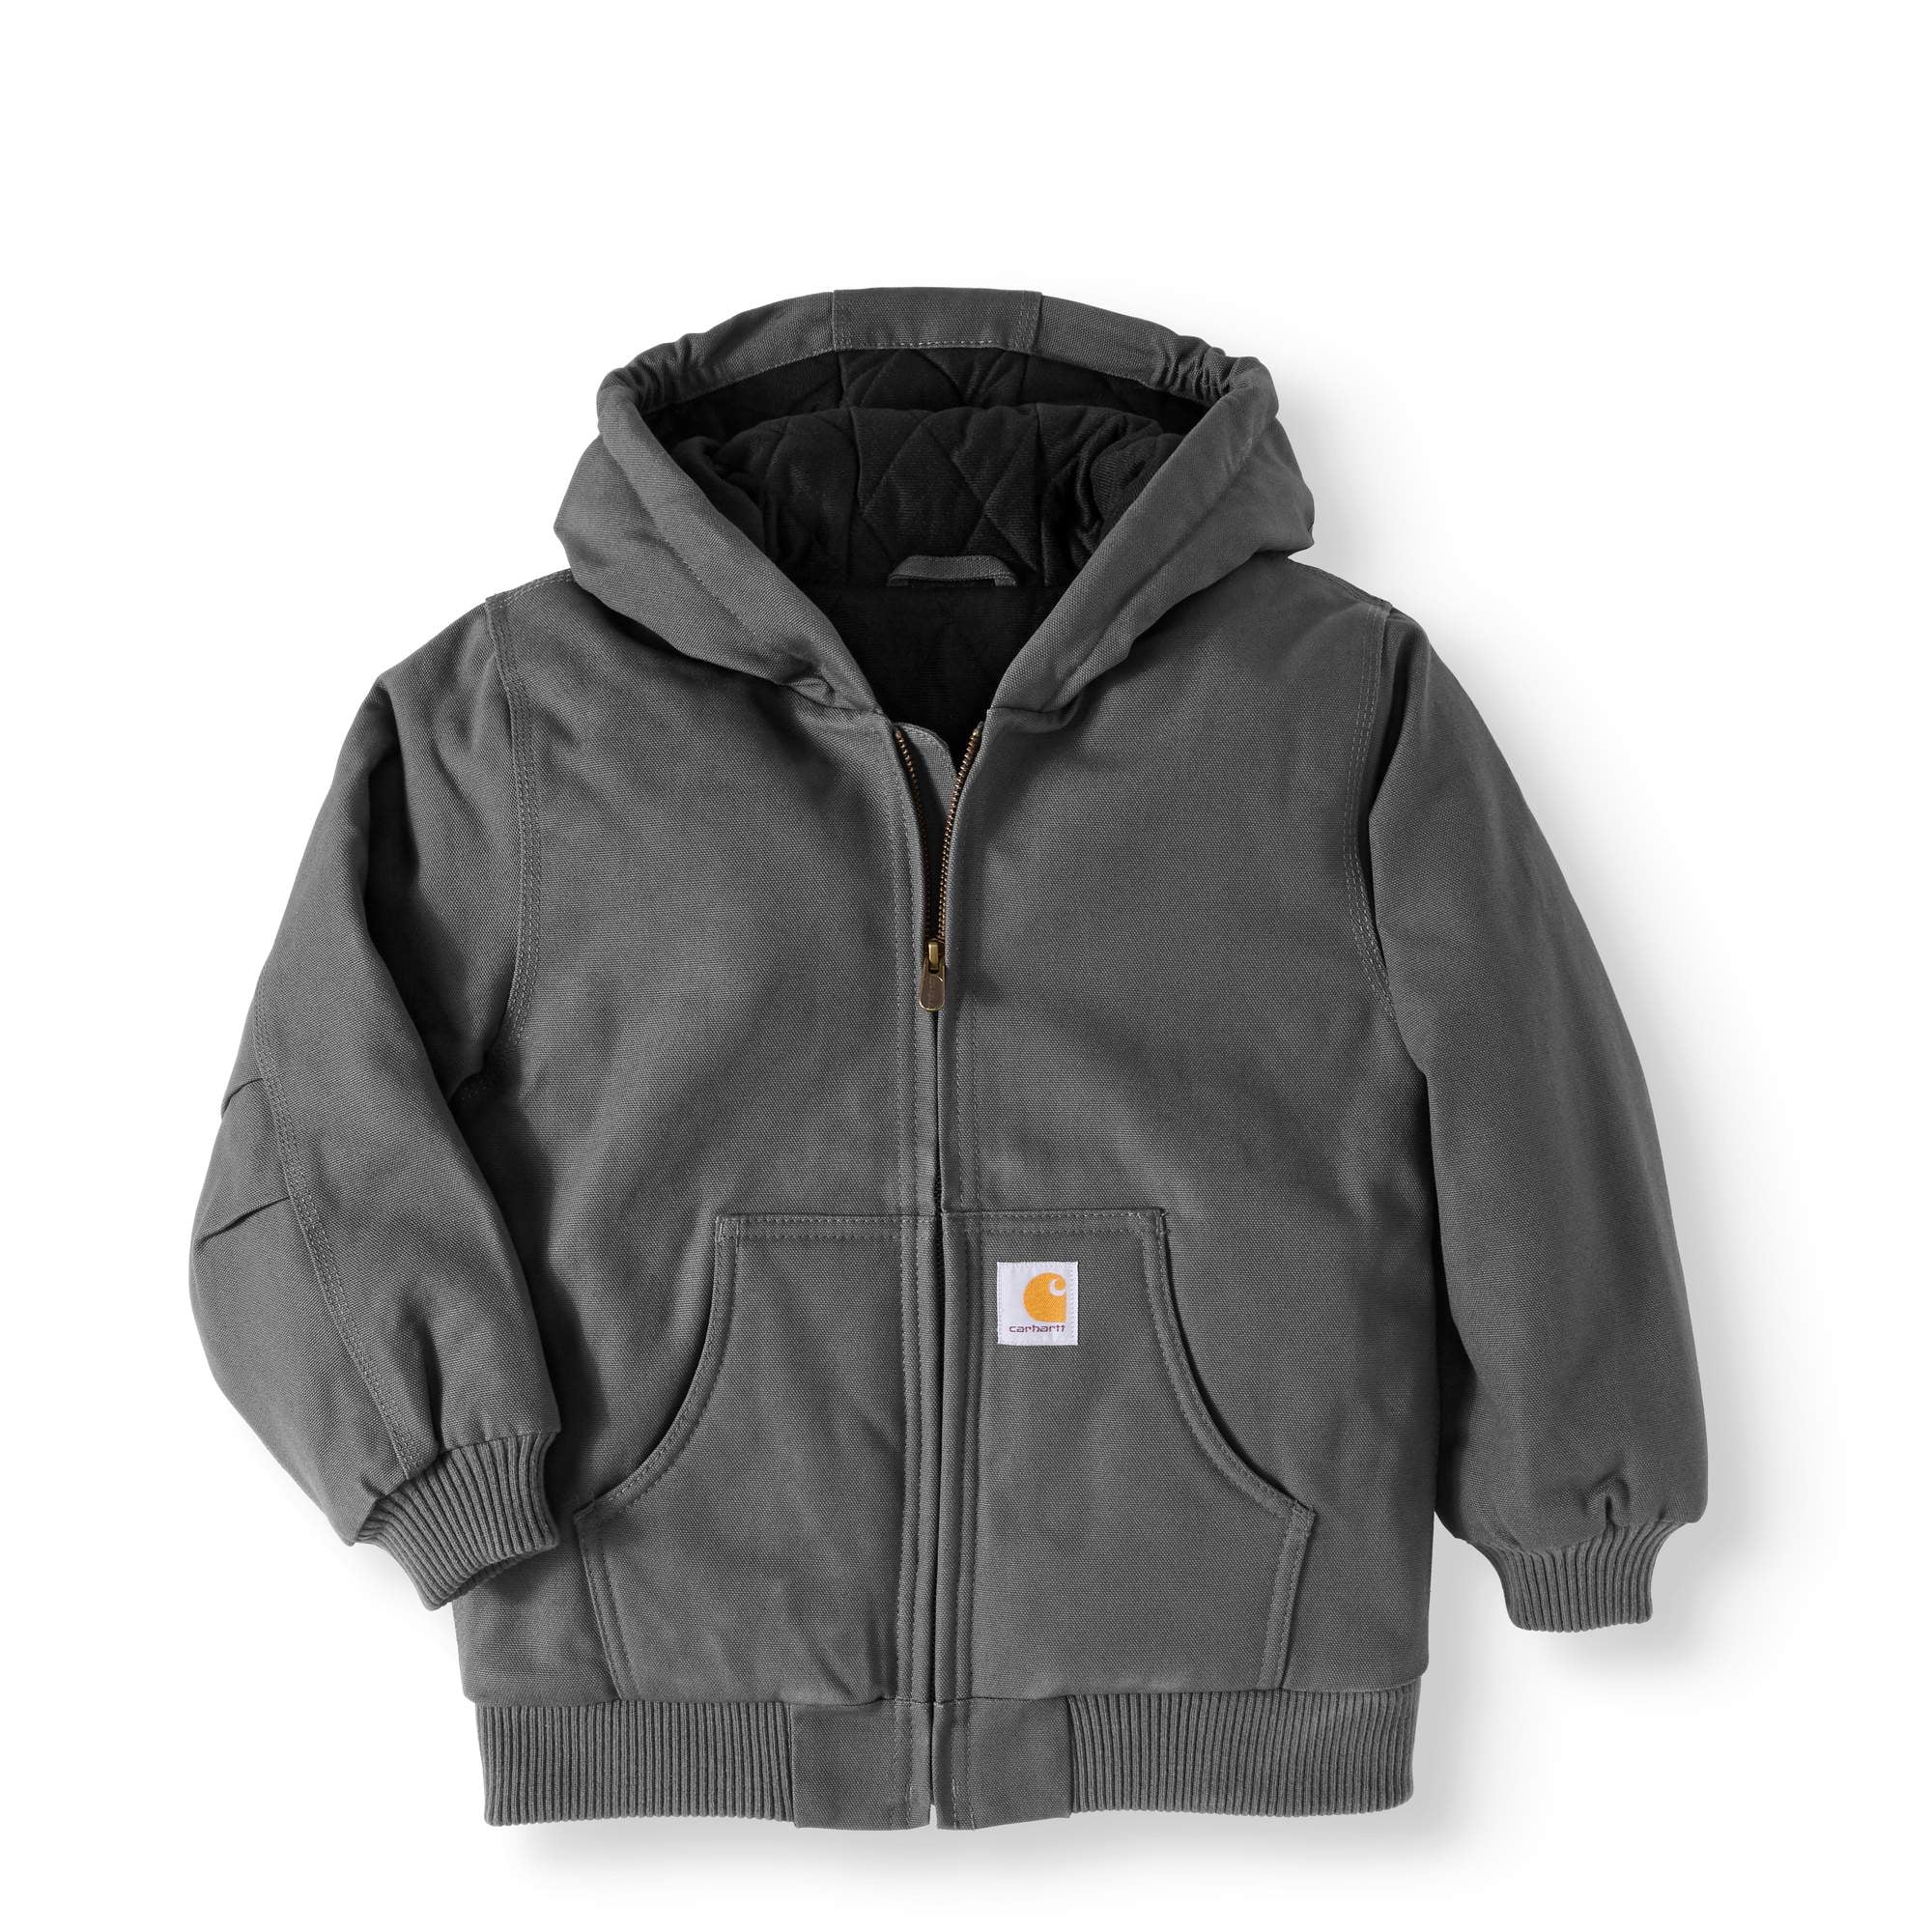 Carhartt Boys Toddler Active Quilted Flannel Lined Jacket